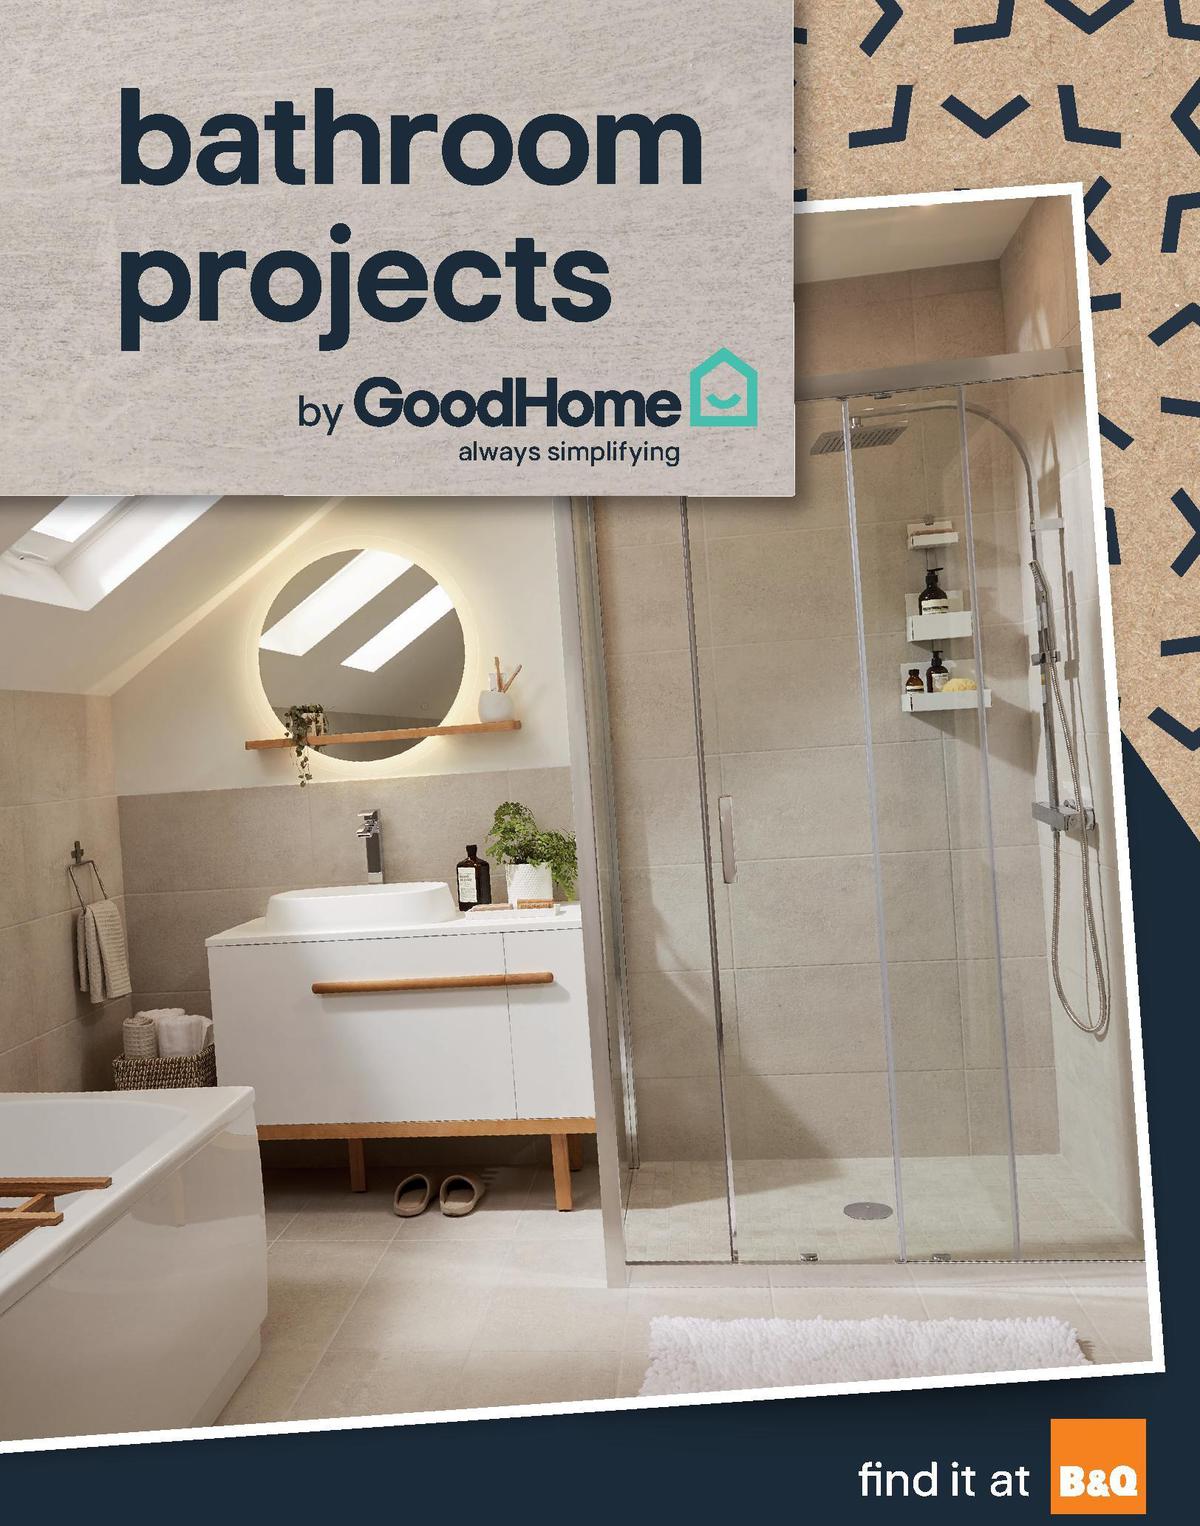 B&Q Bathroom Projects Offers from 1 September